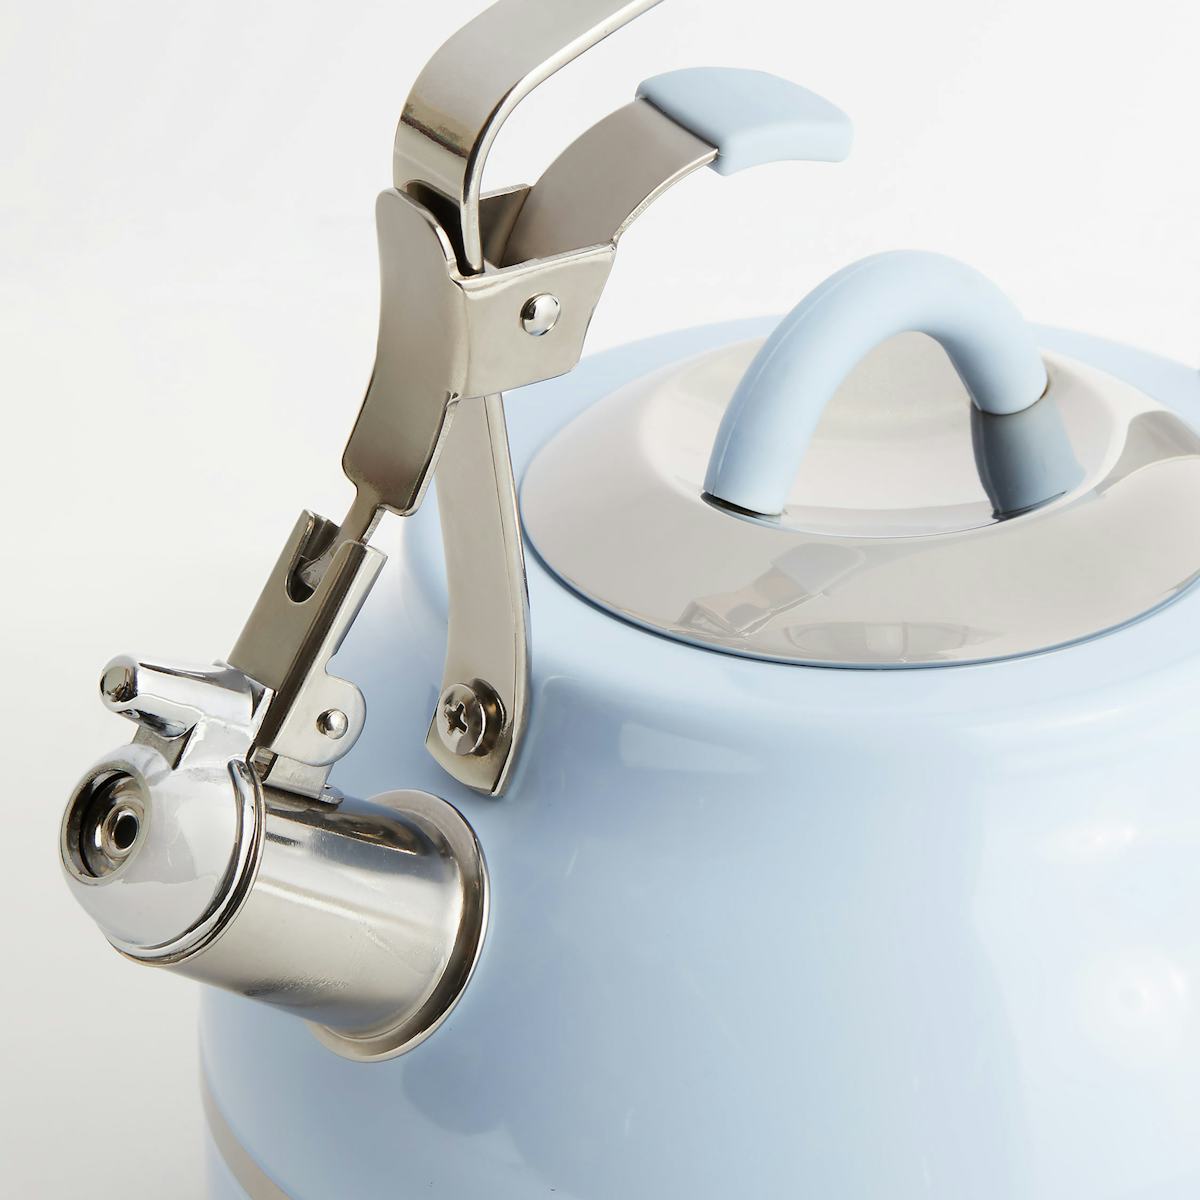 Whistle_Kettle_Blue_1x1_PLATE_FOR_LID_0311.jpeg